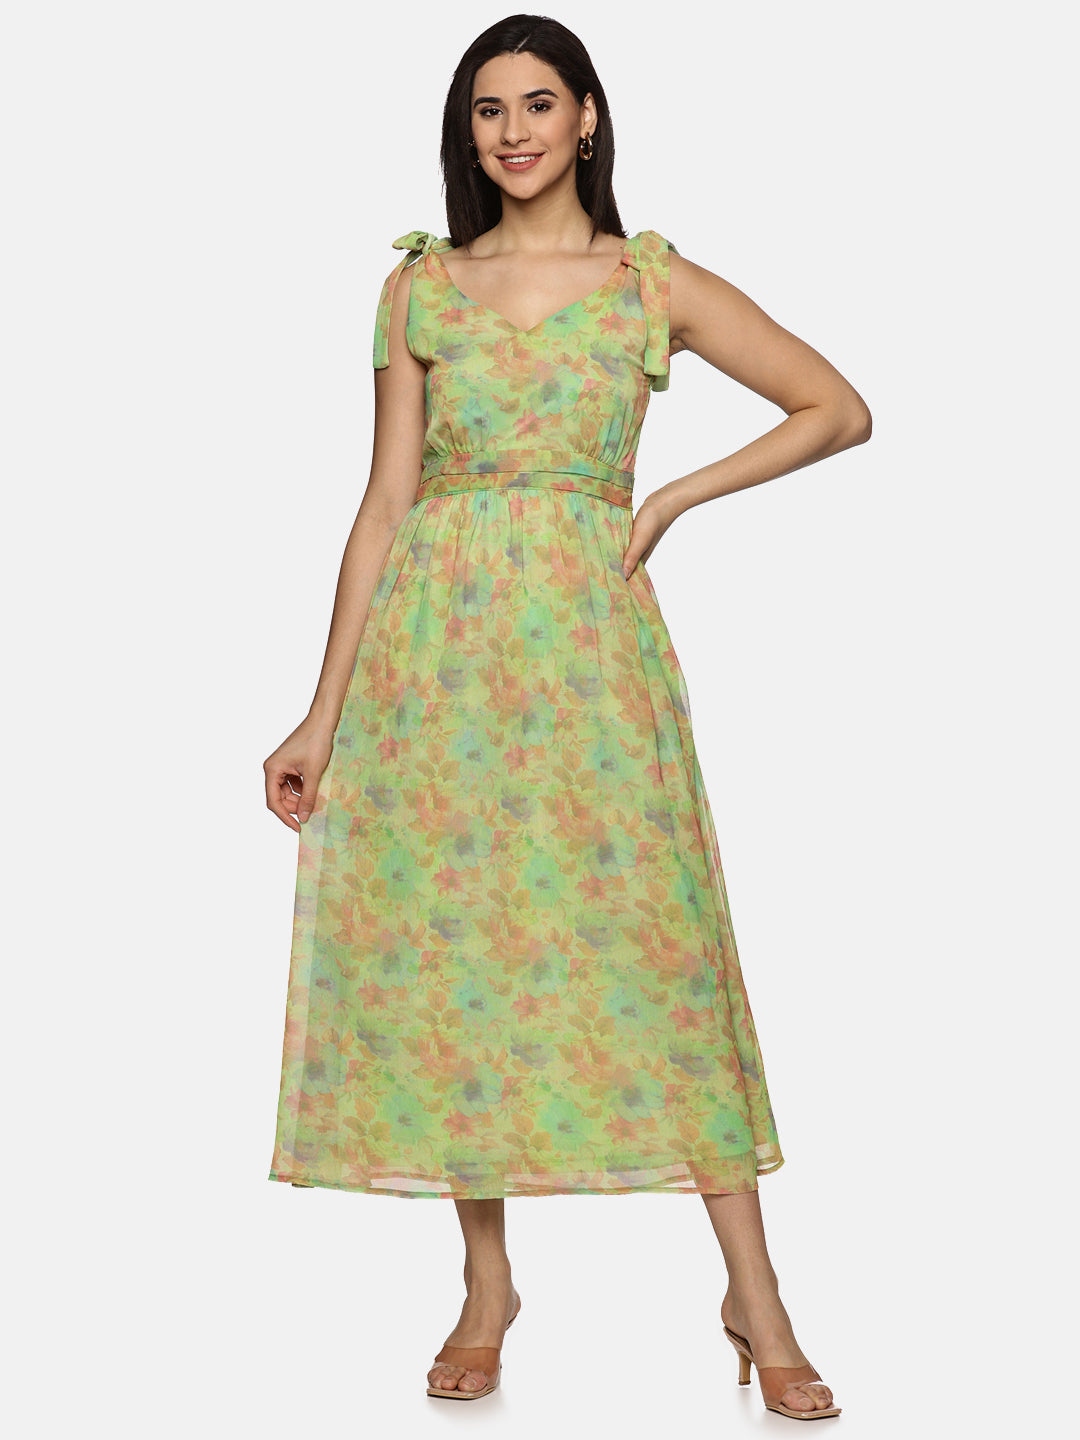 Buy Green Printed Floral Chiffon Fabric | Tie-up Detailed Dress Online In India